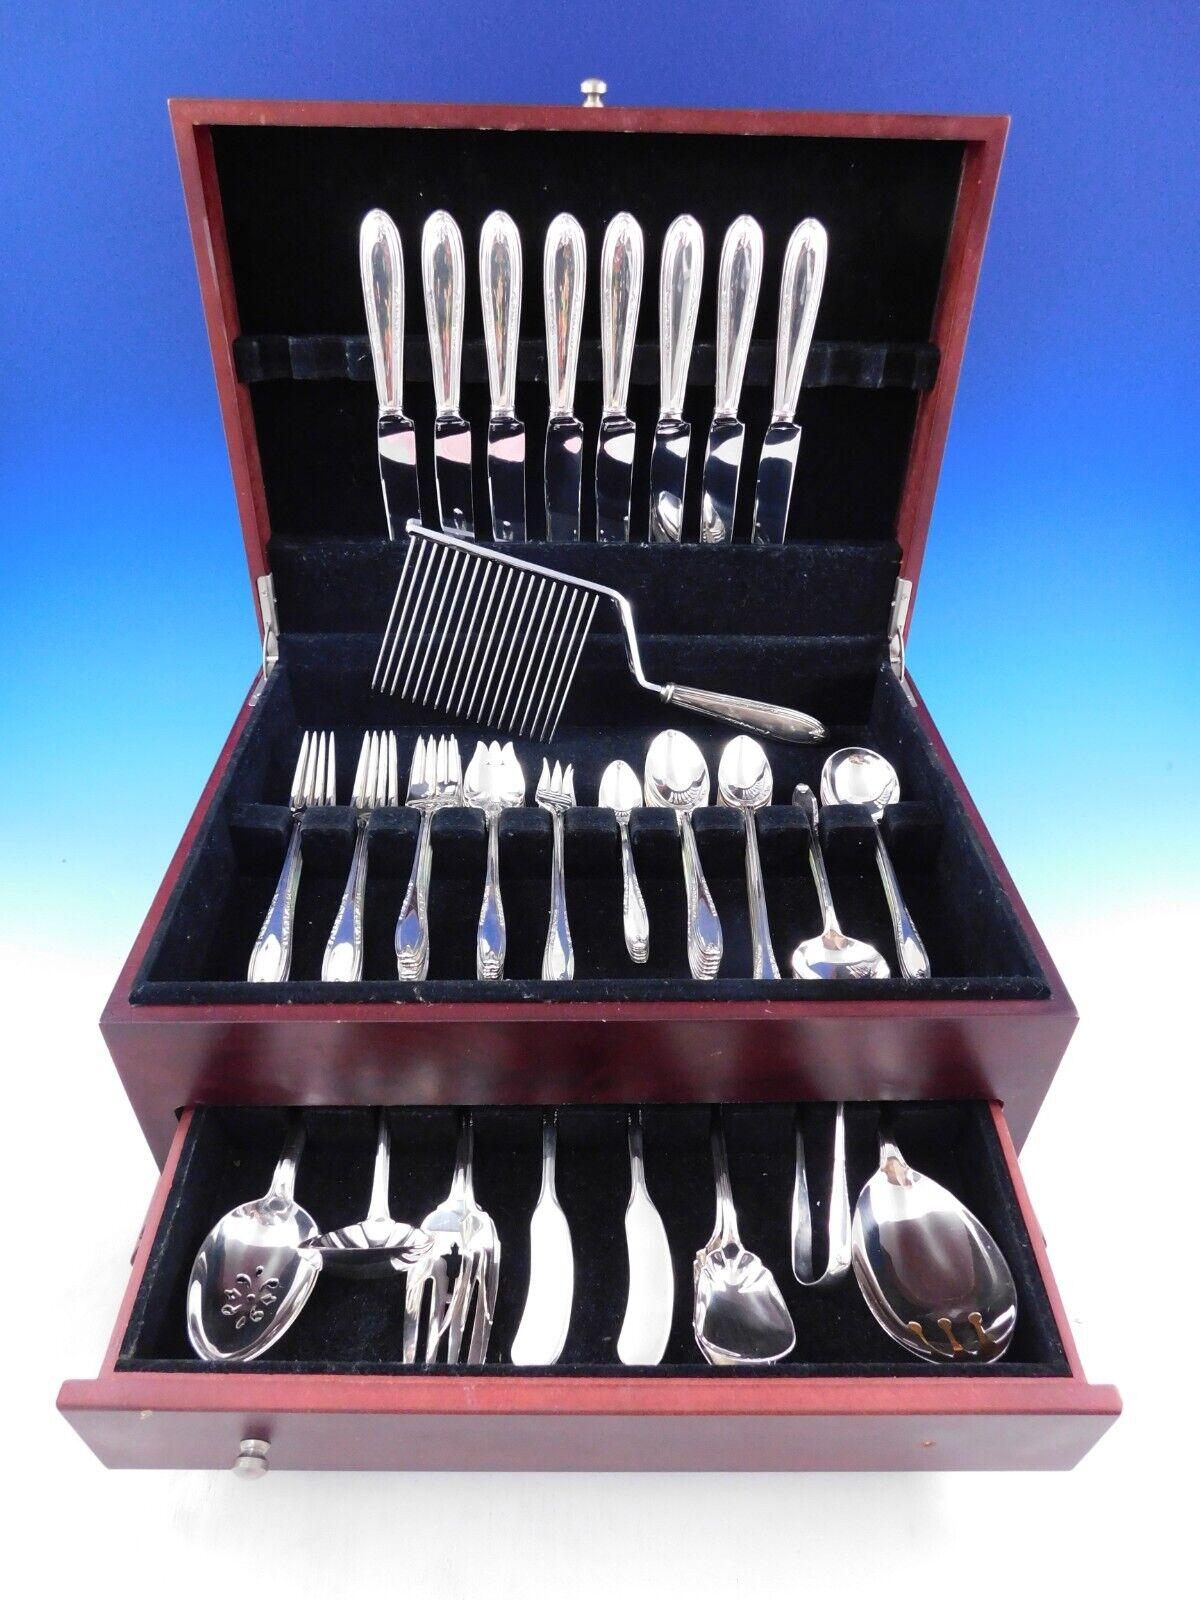 Leonore by Manchester c1939 Sterling Silver Flatware set - 92 pieces. This set includes:

8 Knives, 8 7/8